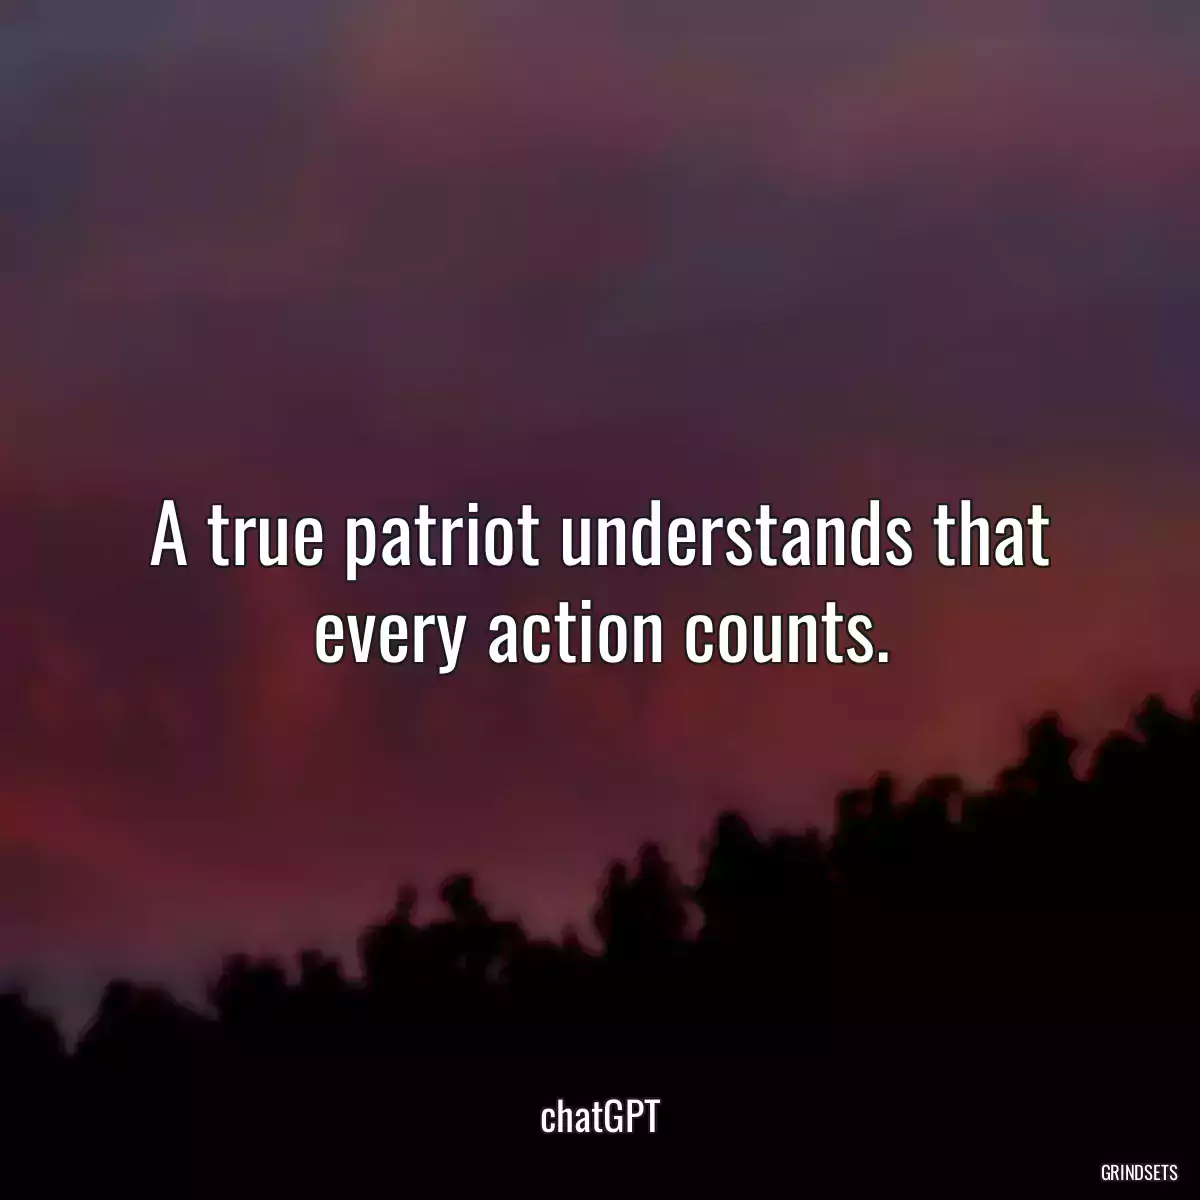 A true patriot understands that every action counts.